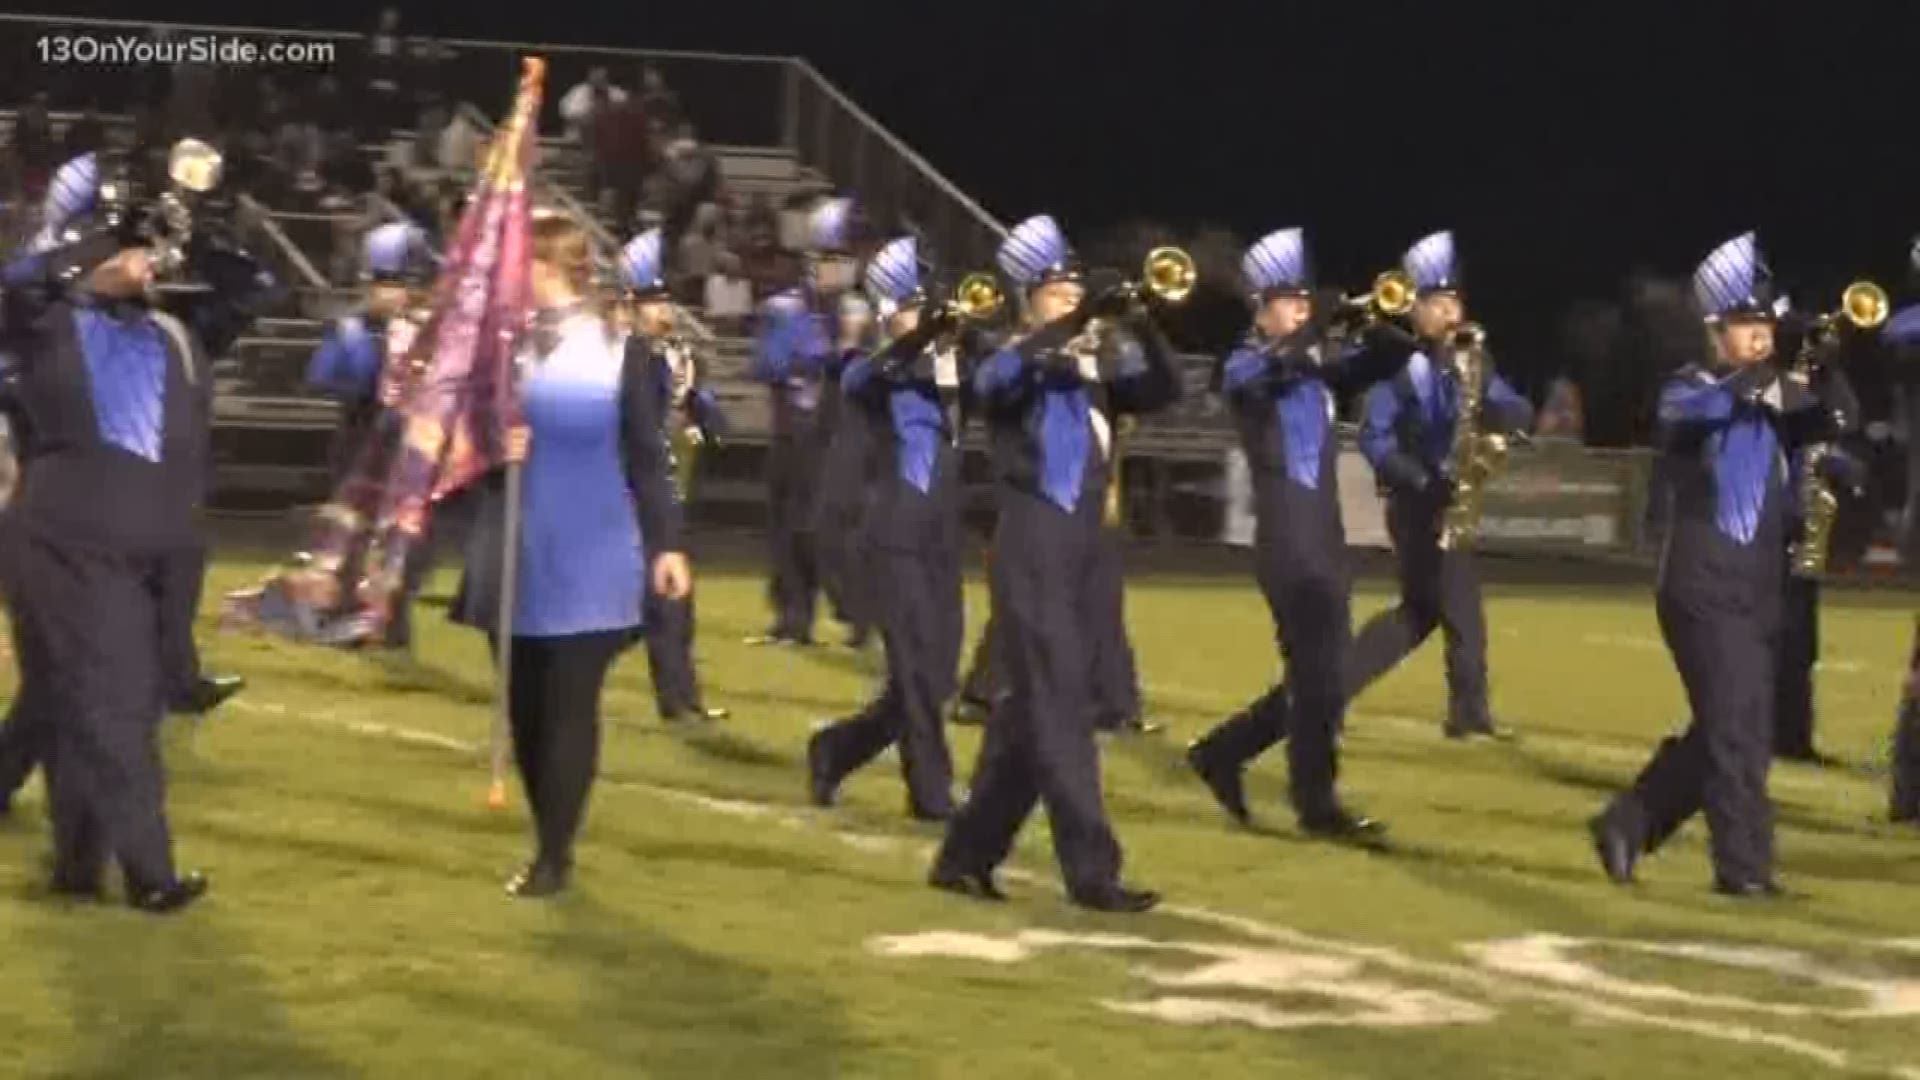 The band from Mona Shores marches on Friday for the 13 On Your Sidelines Game of the Week.